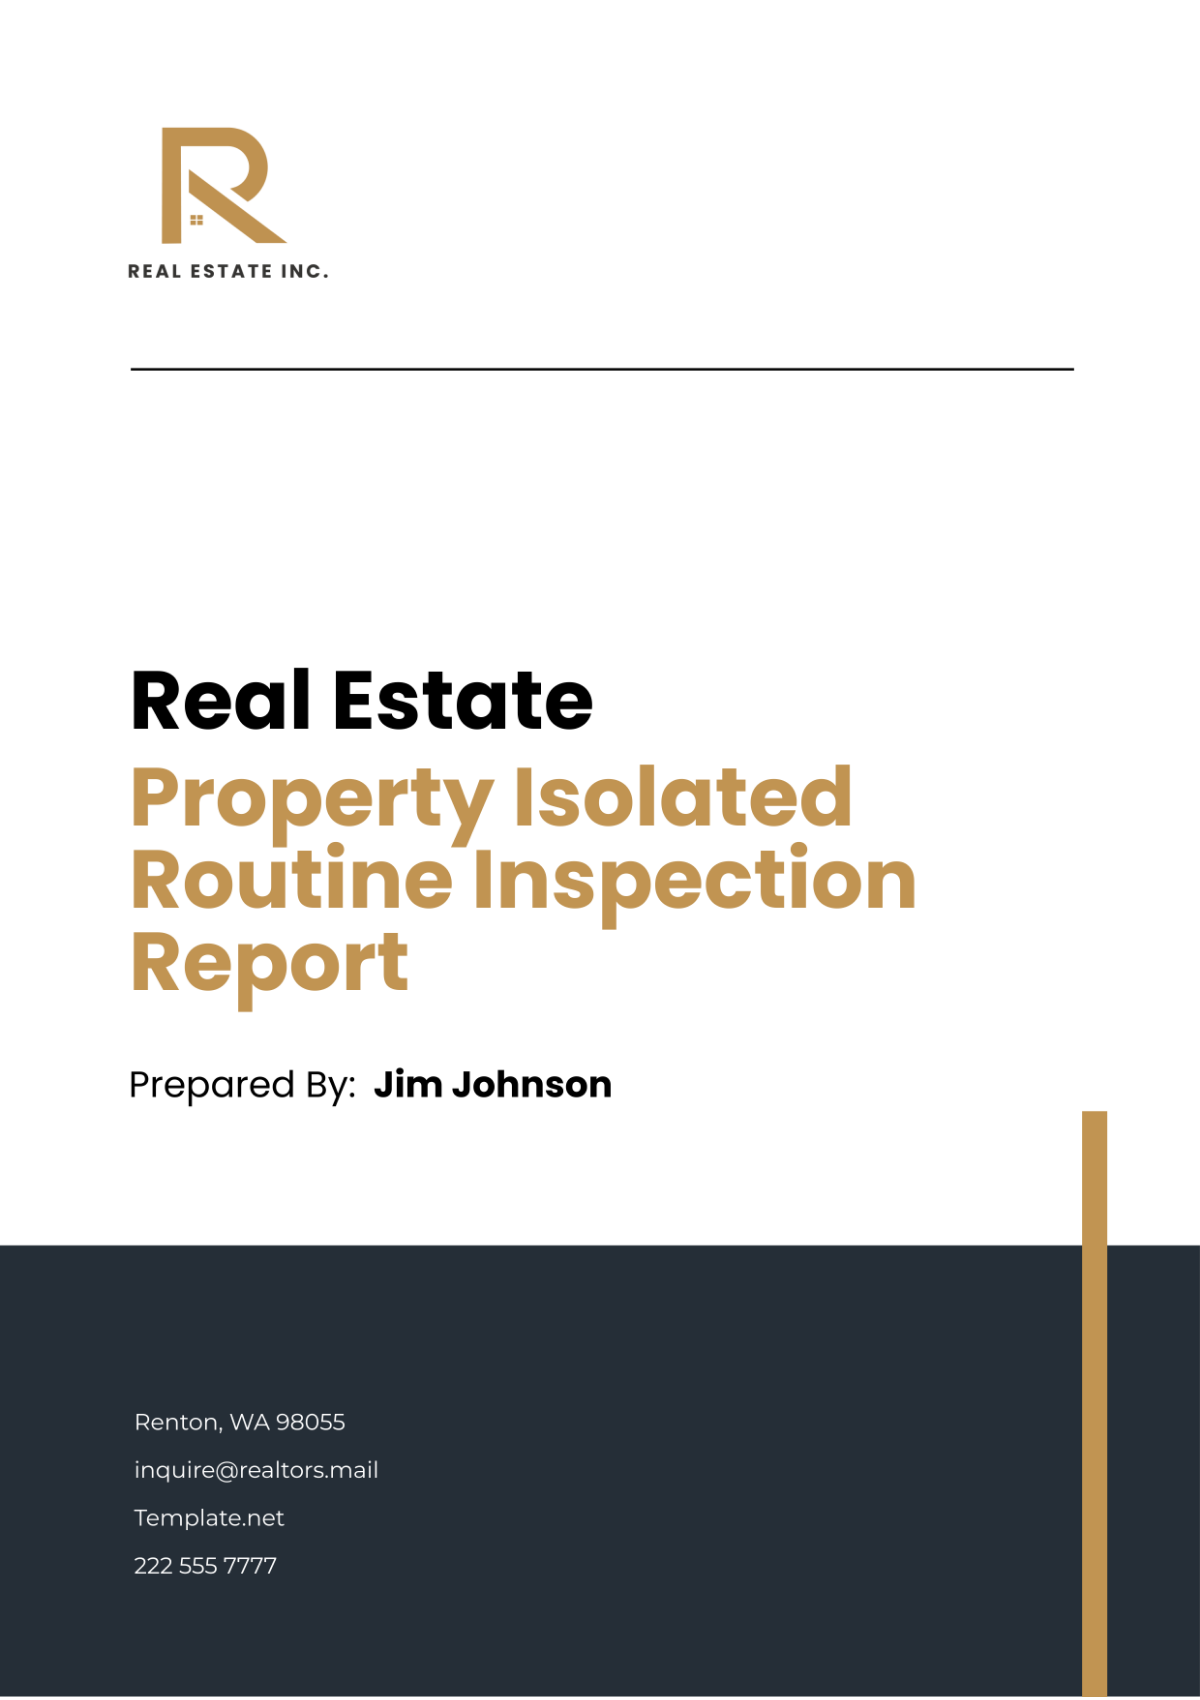 Real Estate Property Isolated Routine Inspection Report Template